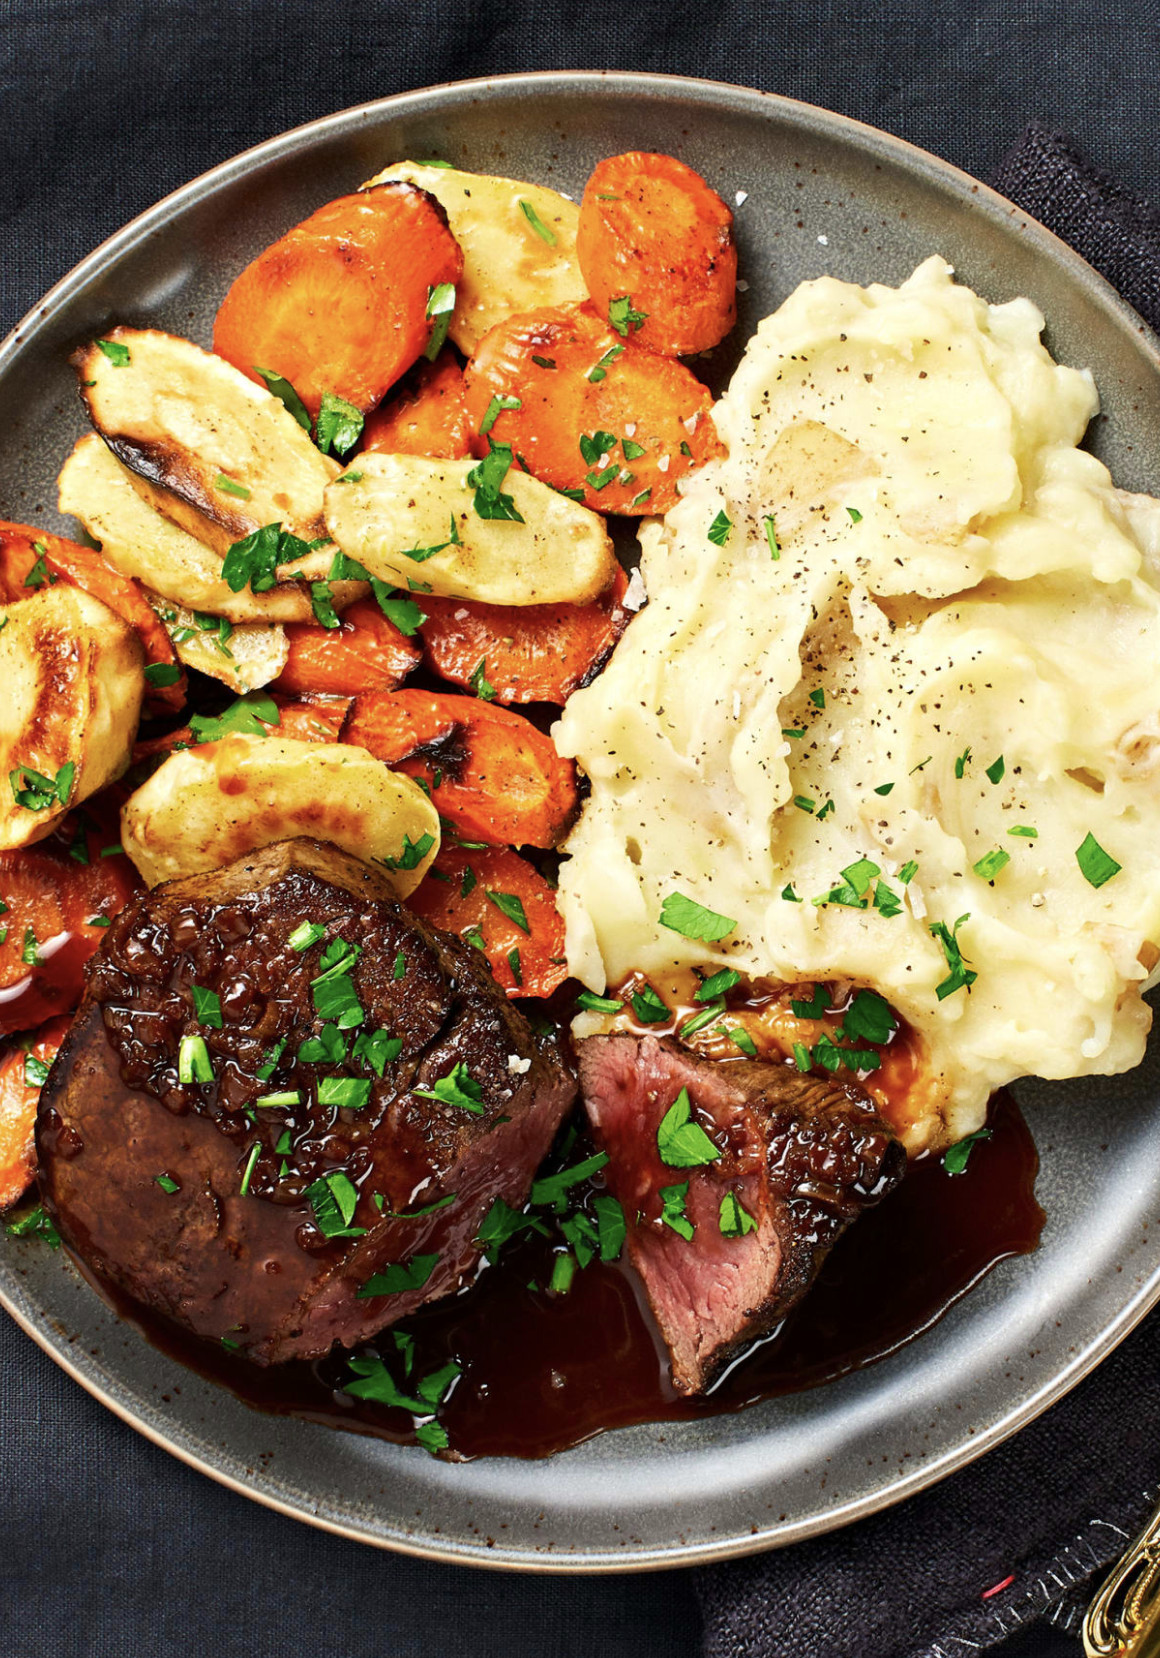 Gourmet Mashed Potatoes Recipes
 Beef Tenderloin with Brown Butter Roasted Veggies and